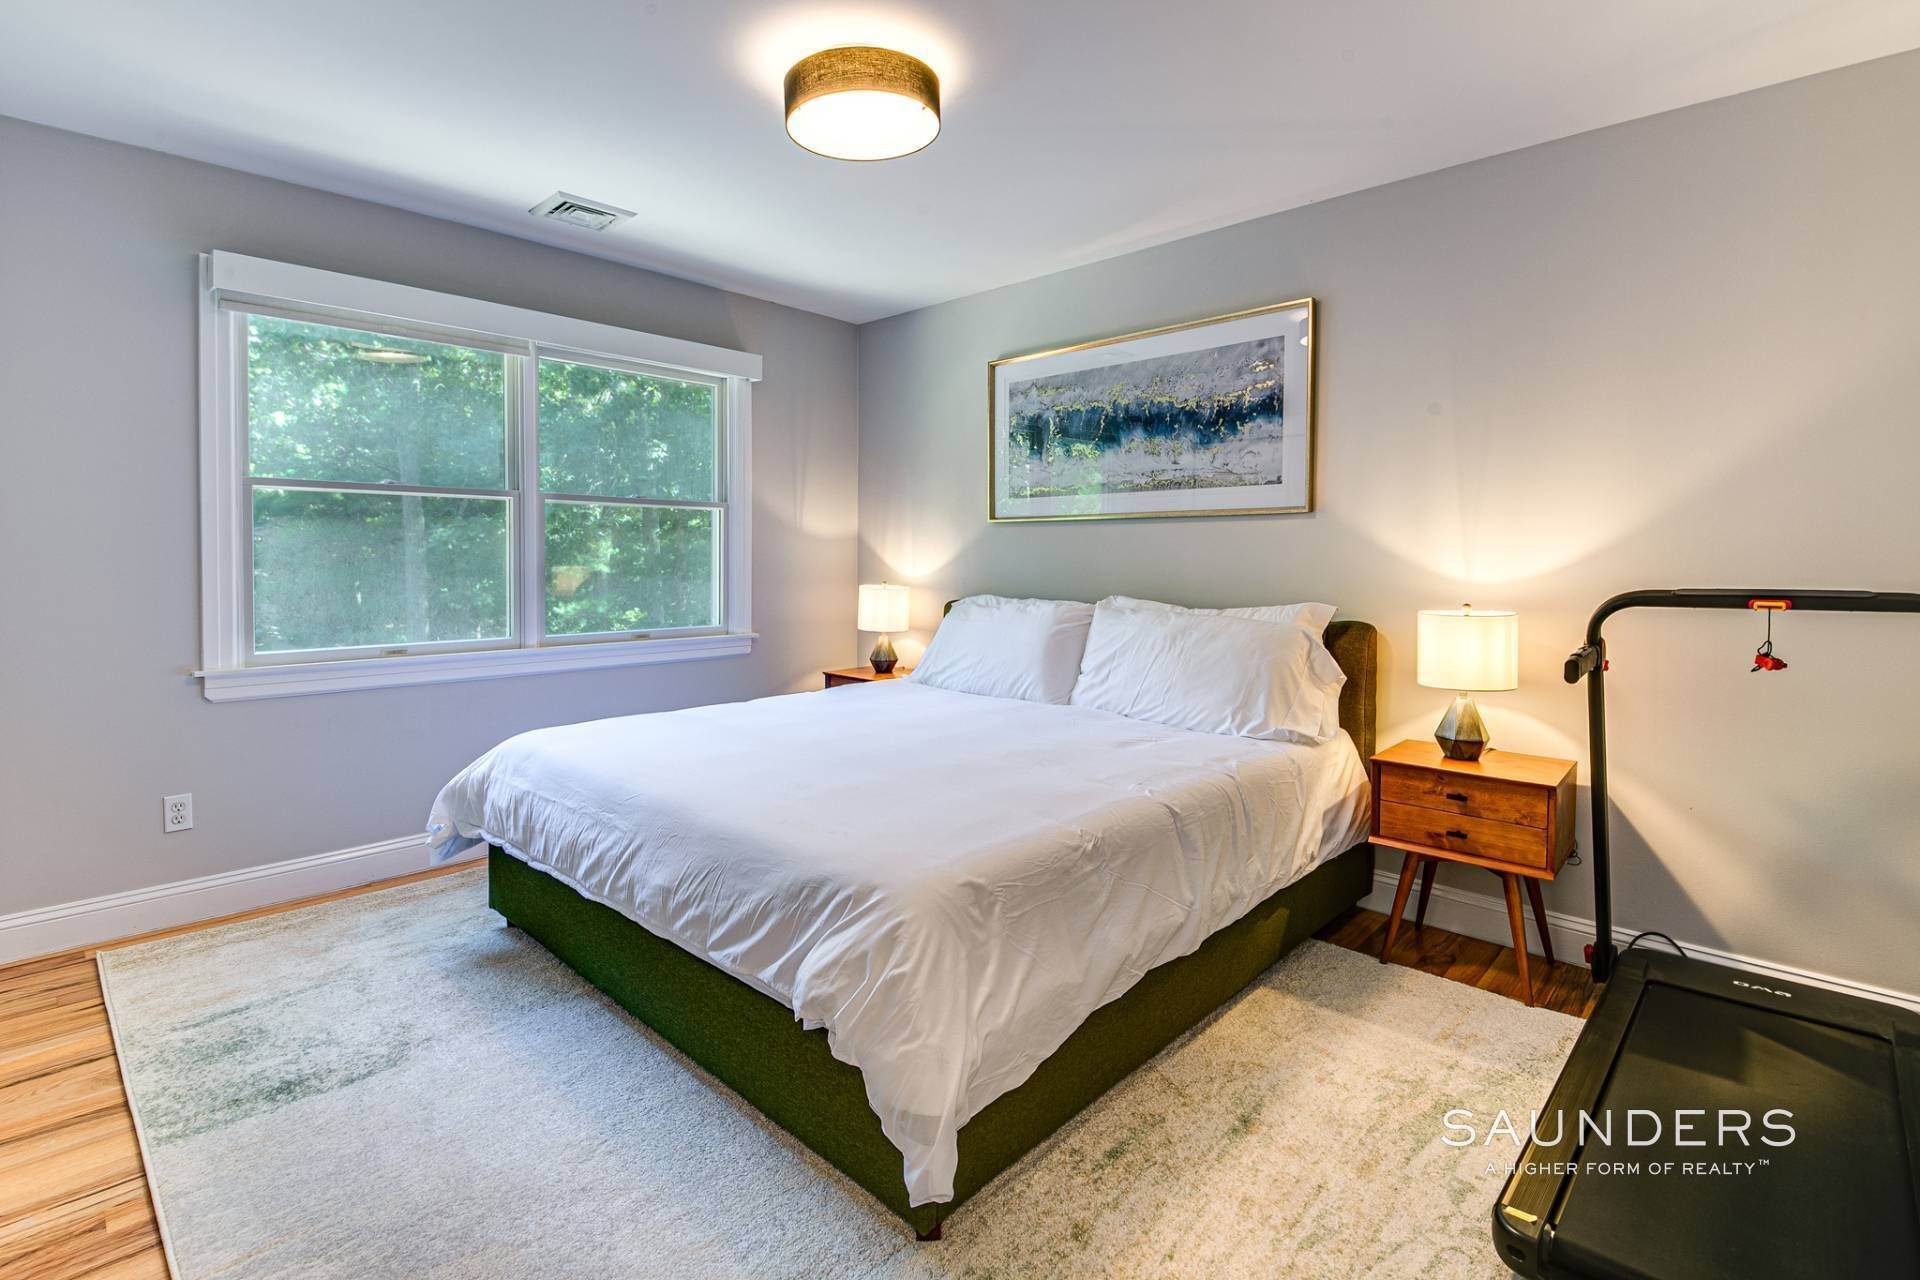 9. Single Family Homes at 4 Bedroom, 3 Full Bathroom, Heated Pool - Tranquil Springs Yr 71 Sycamore Drive, East Hampton, NY 11937